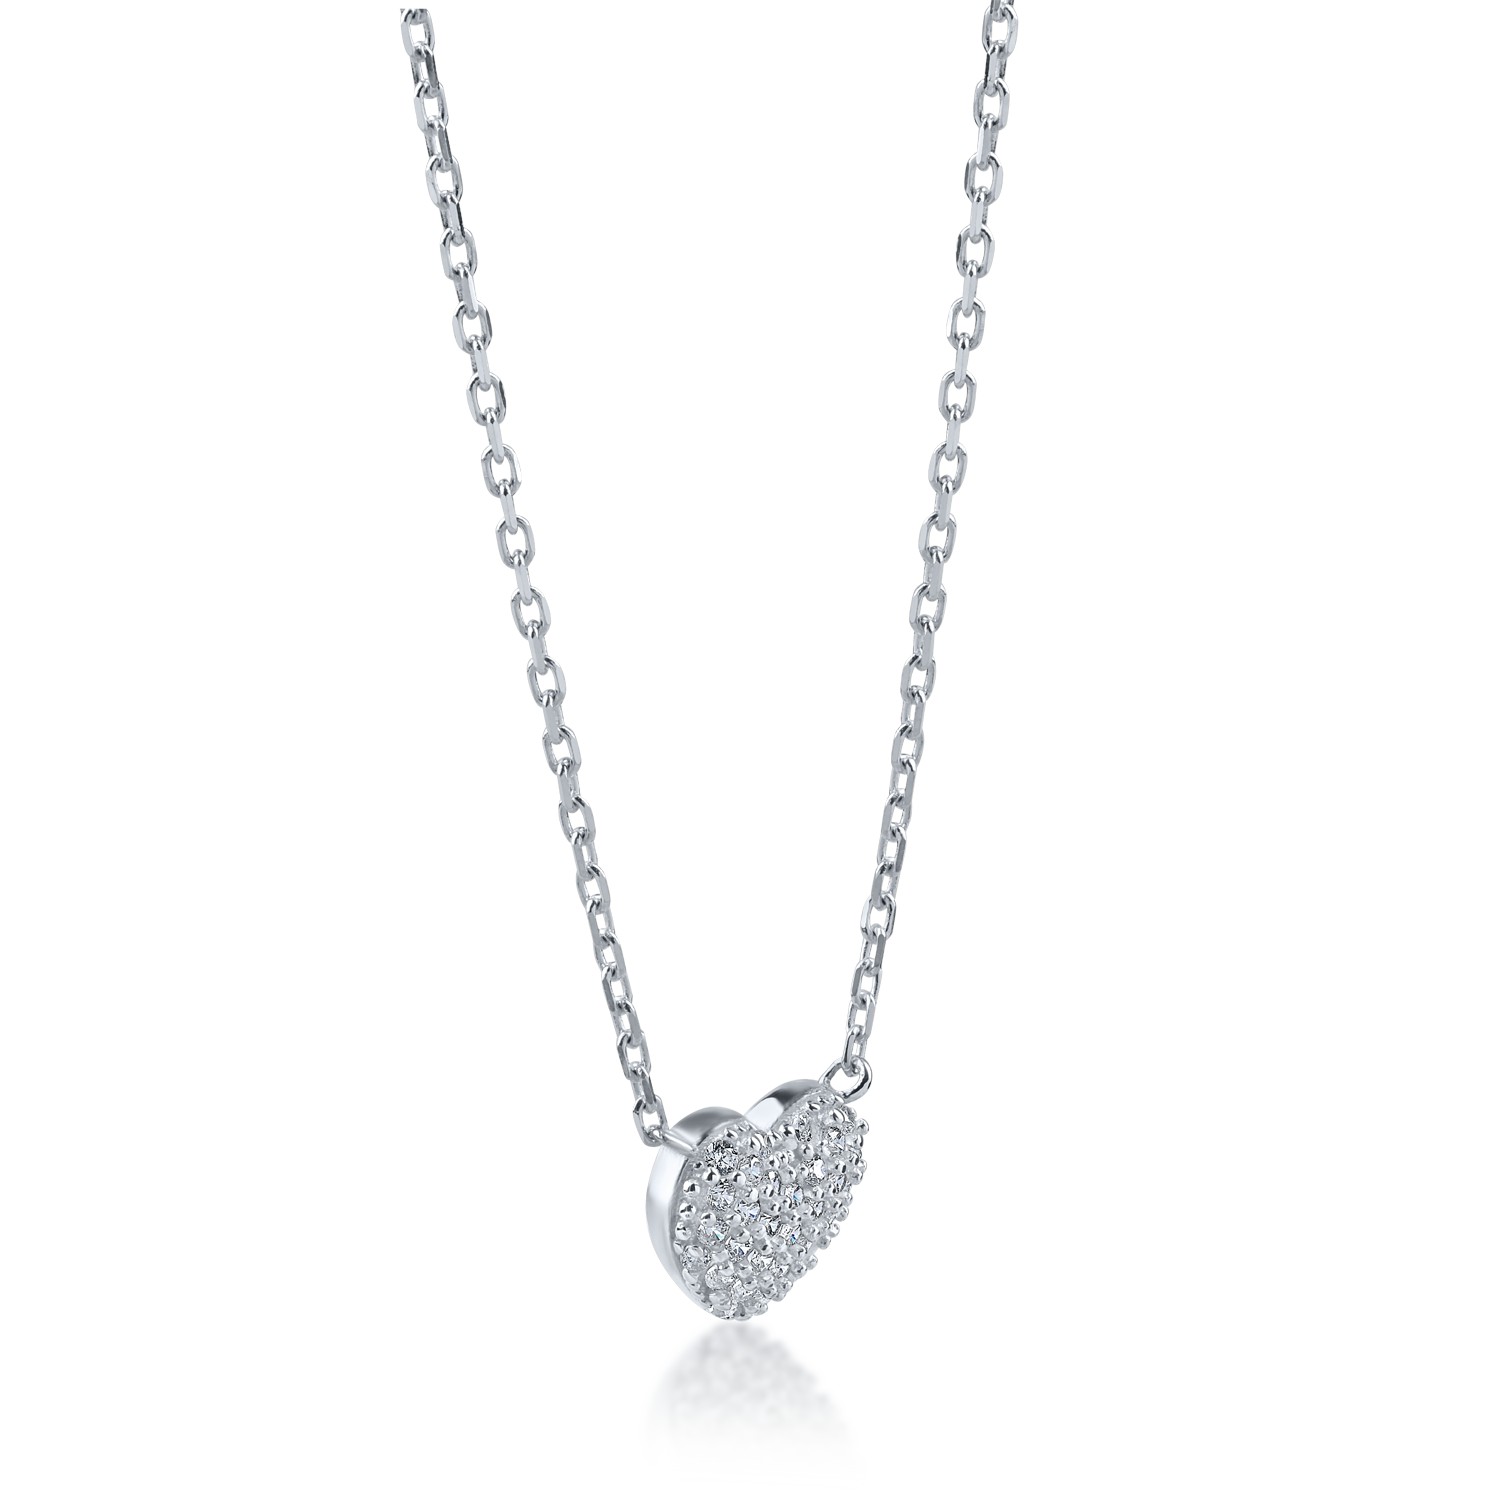 White gold heart pendant necklace with zirconia